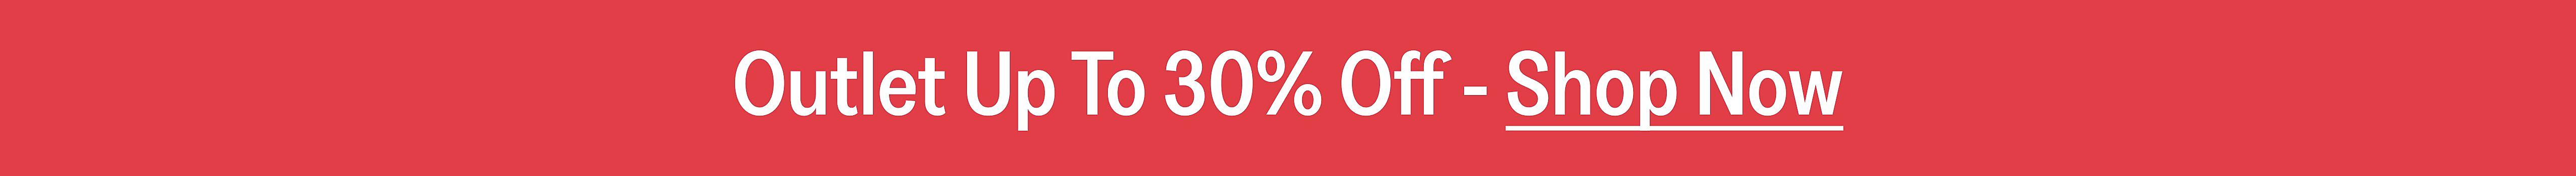 outlet promotion up to 30% off